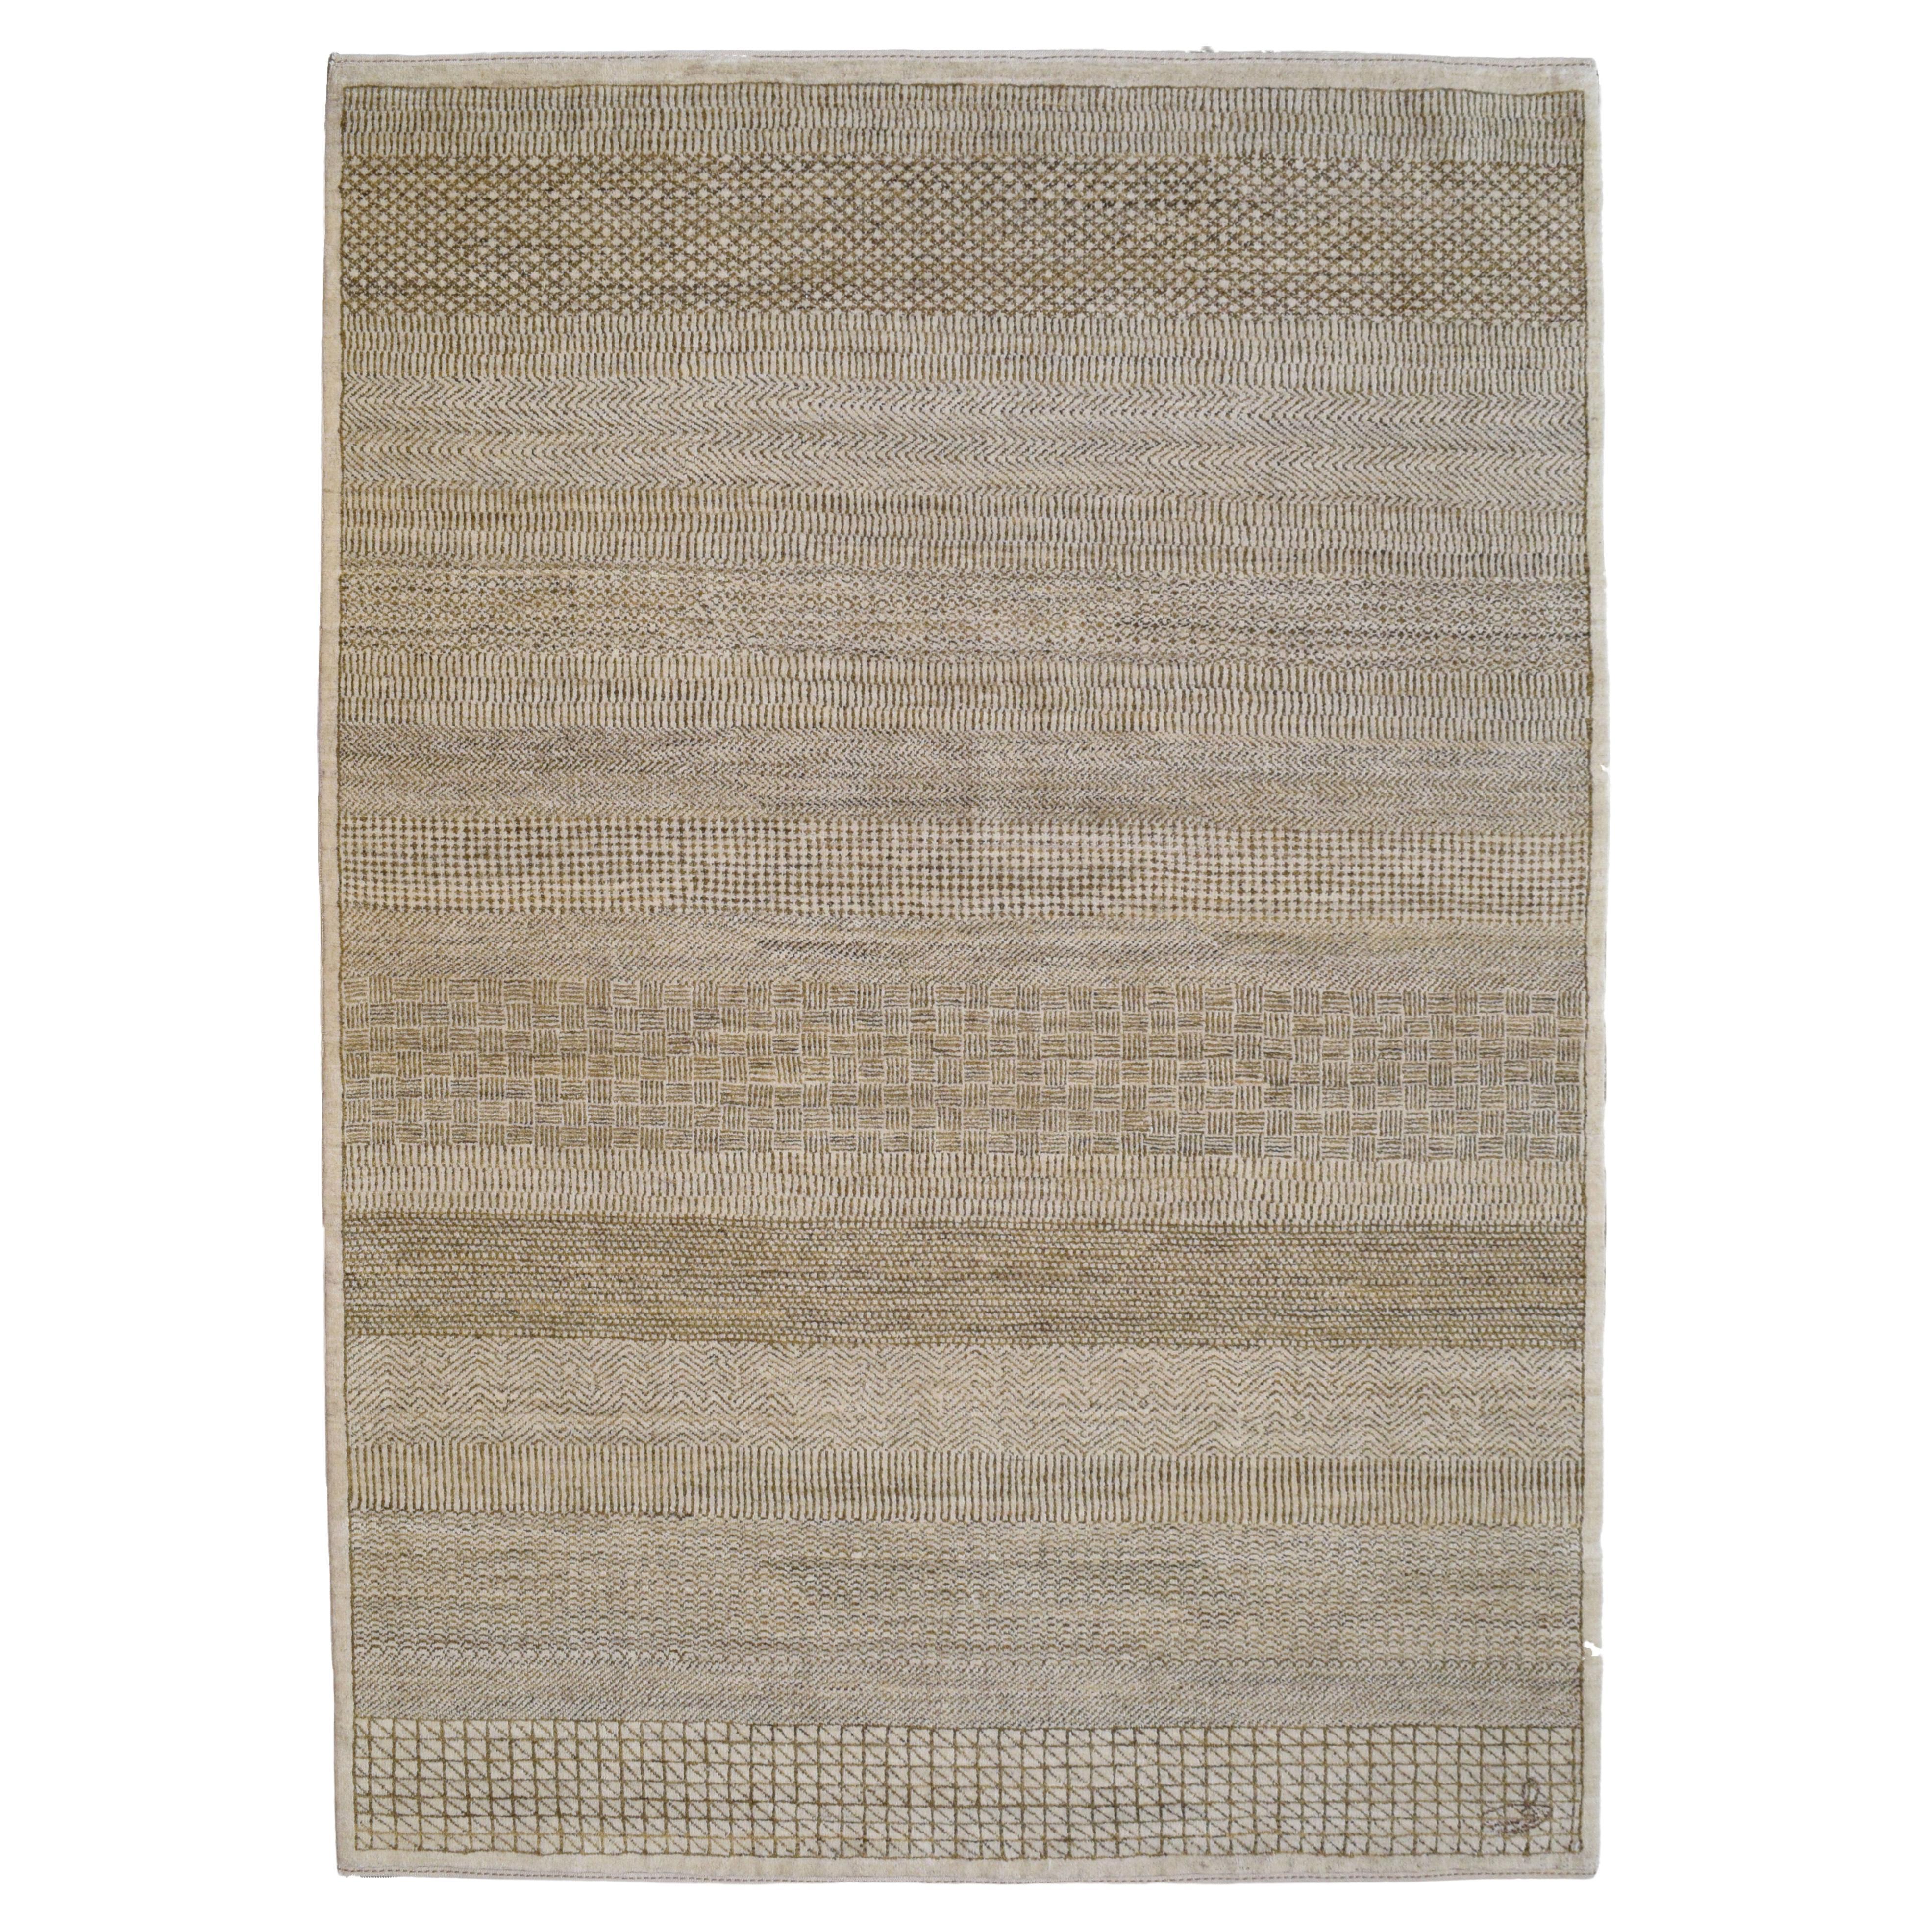 Brown and Cream Modern "Rain" Persian Area Rug from Orley Shabahang, 5 x 7